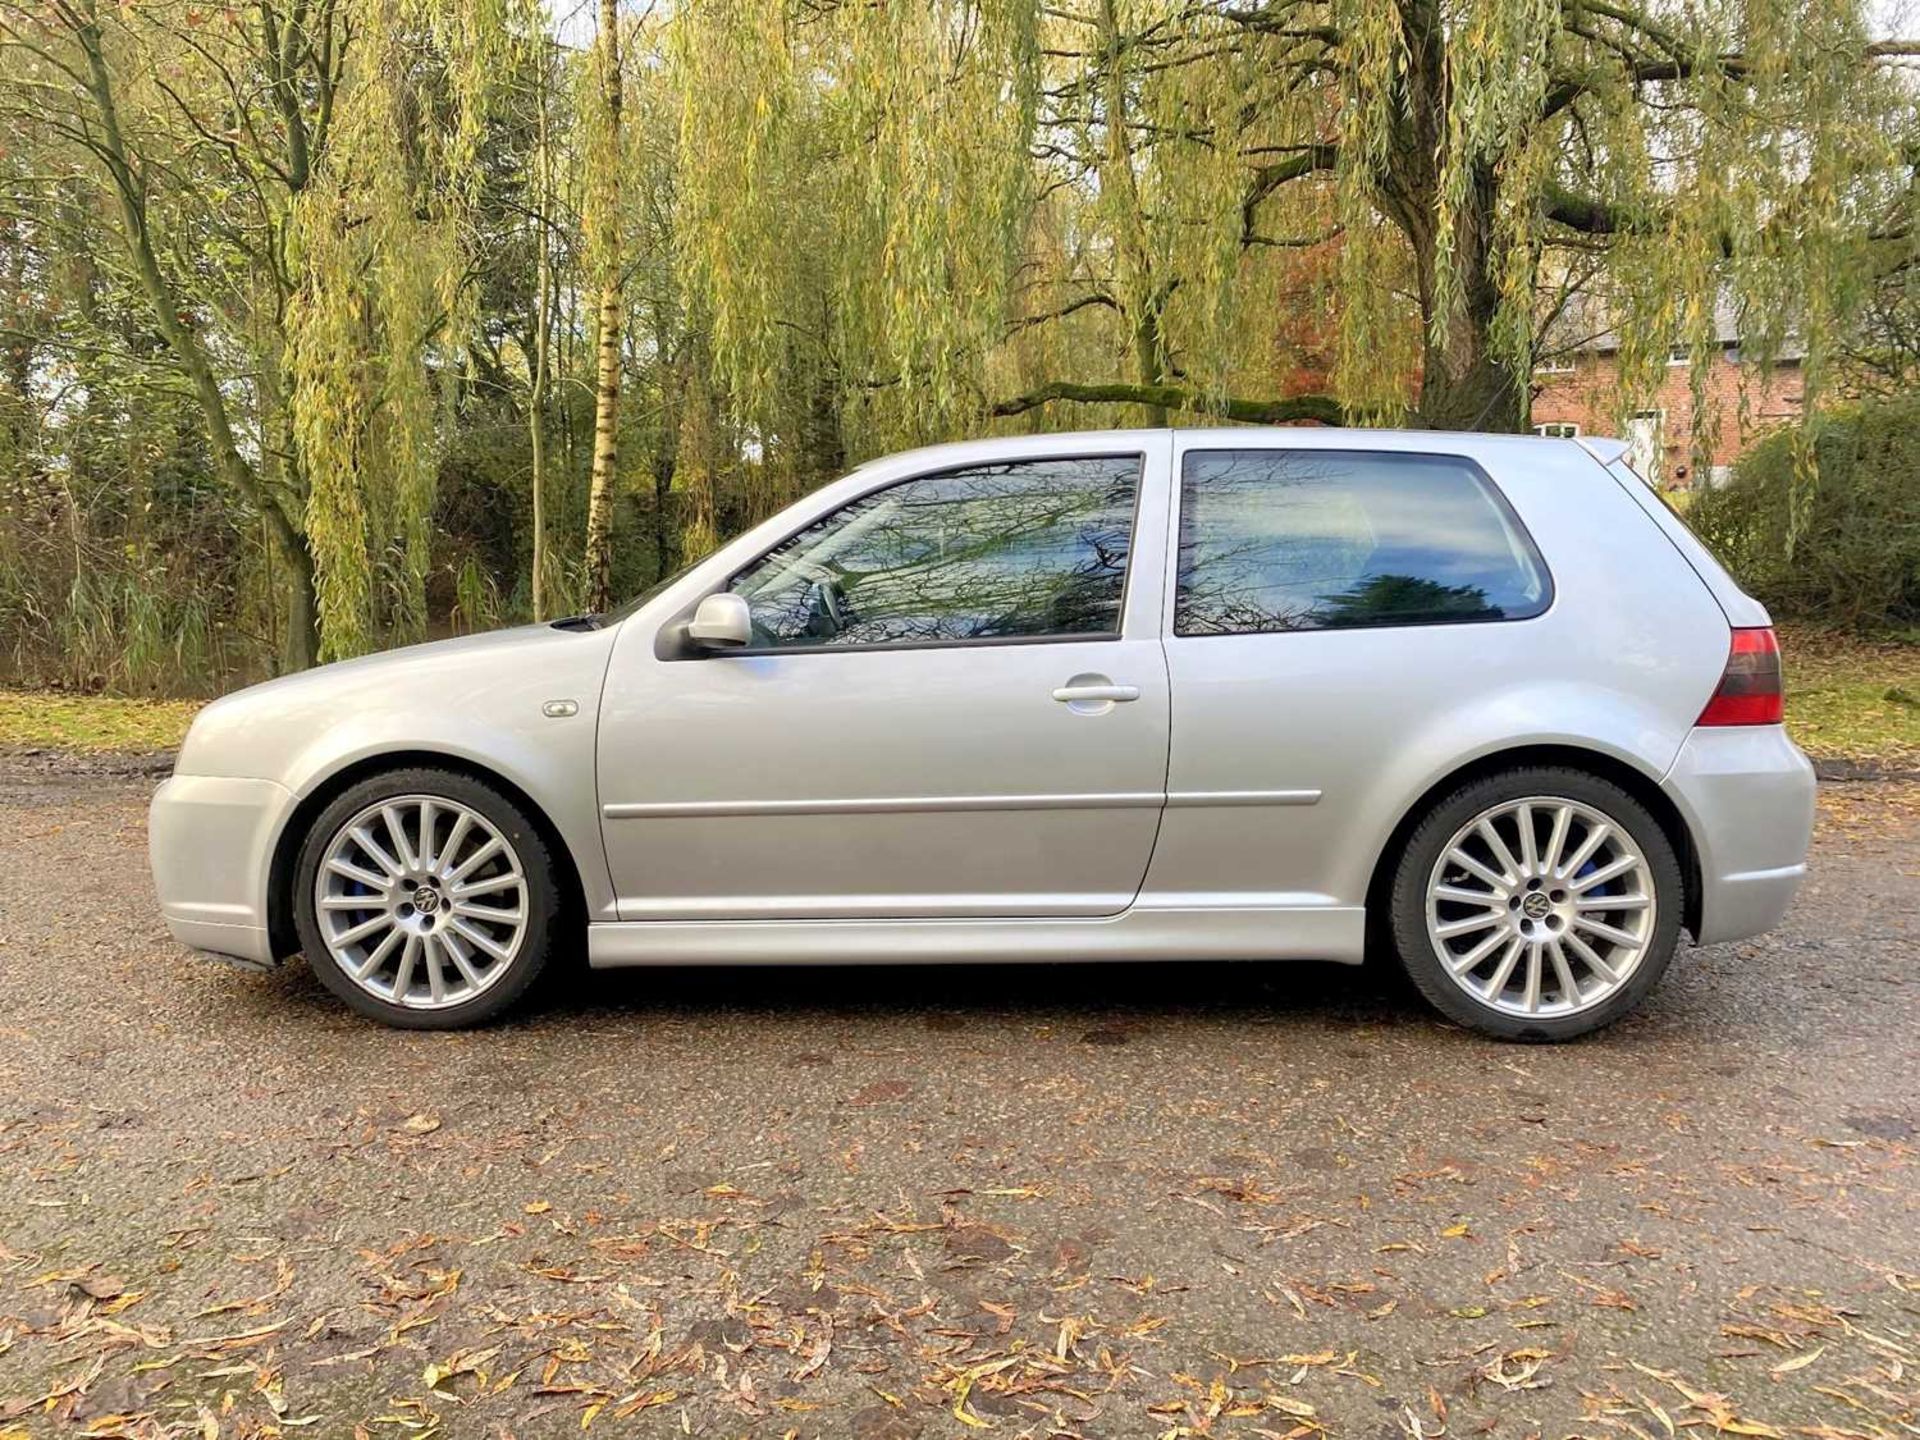 2003 Volkswagen Golf R32 In current ownership for sixteen years - Image 12 of 94